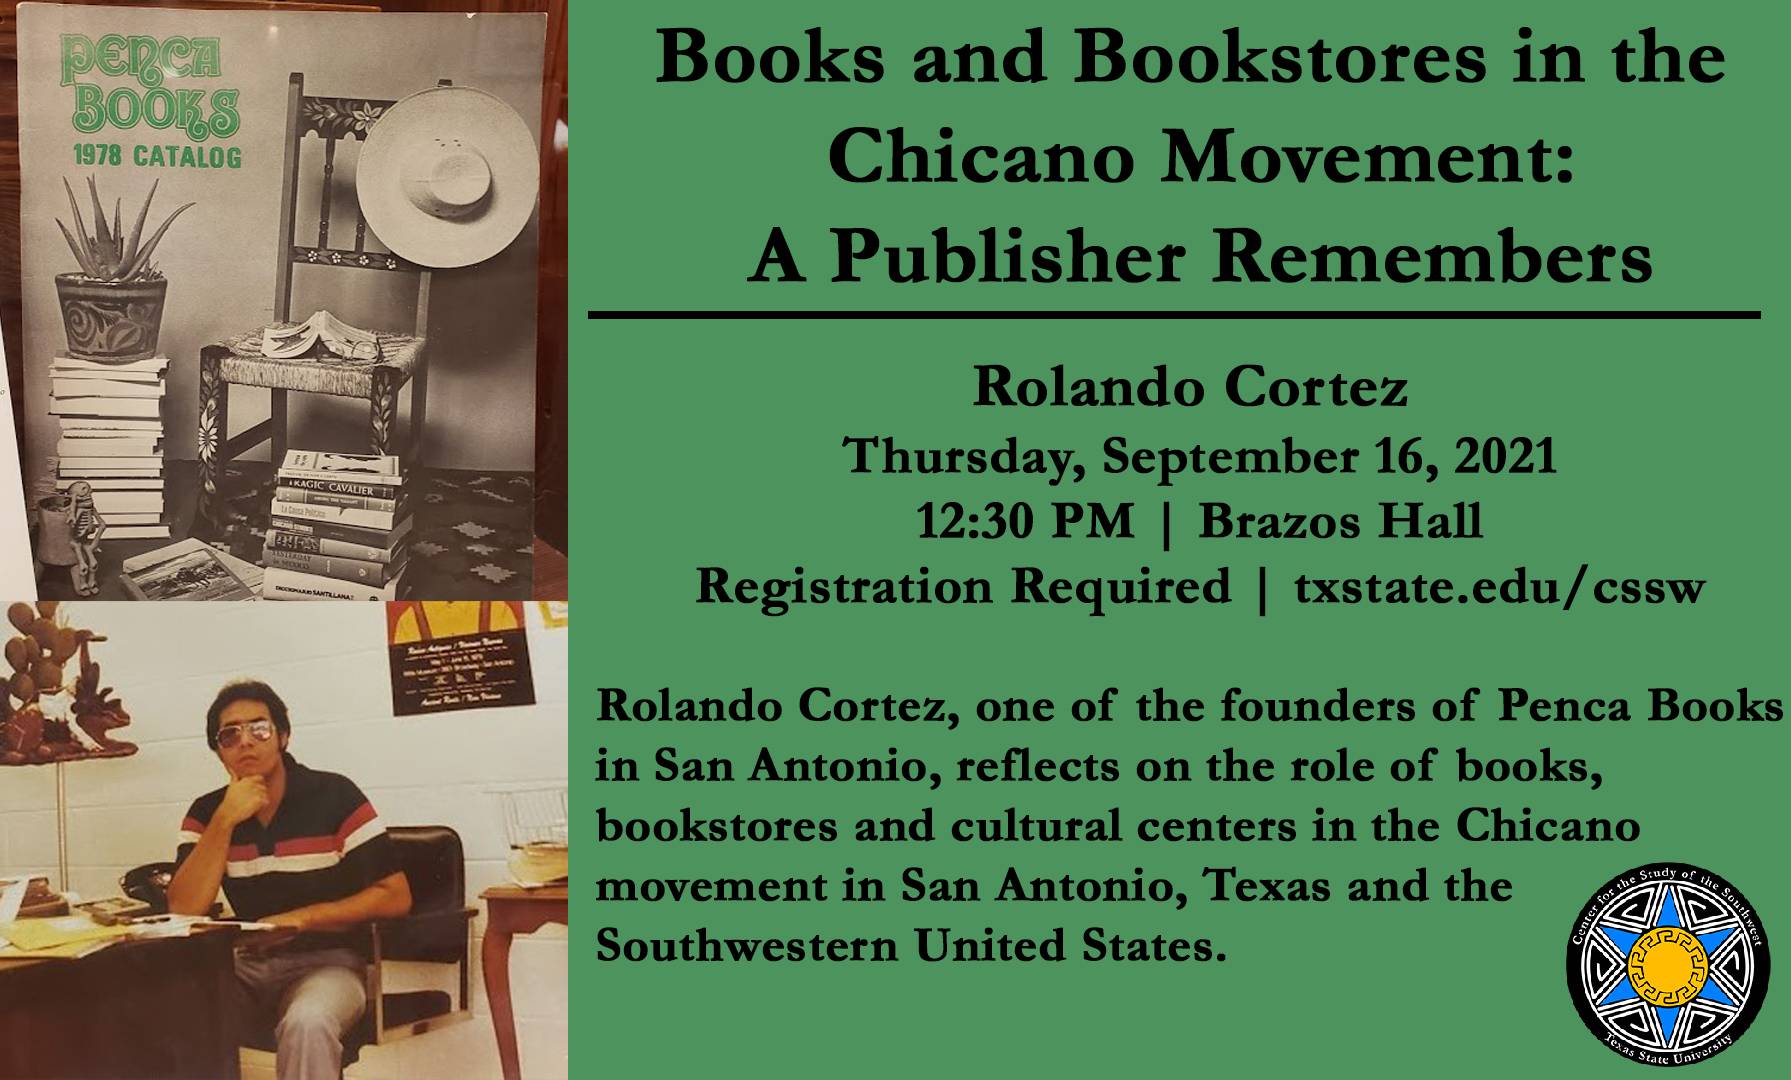 Books and Bookstores in the Chicano Movement